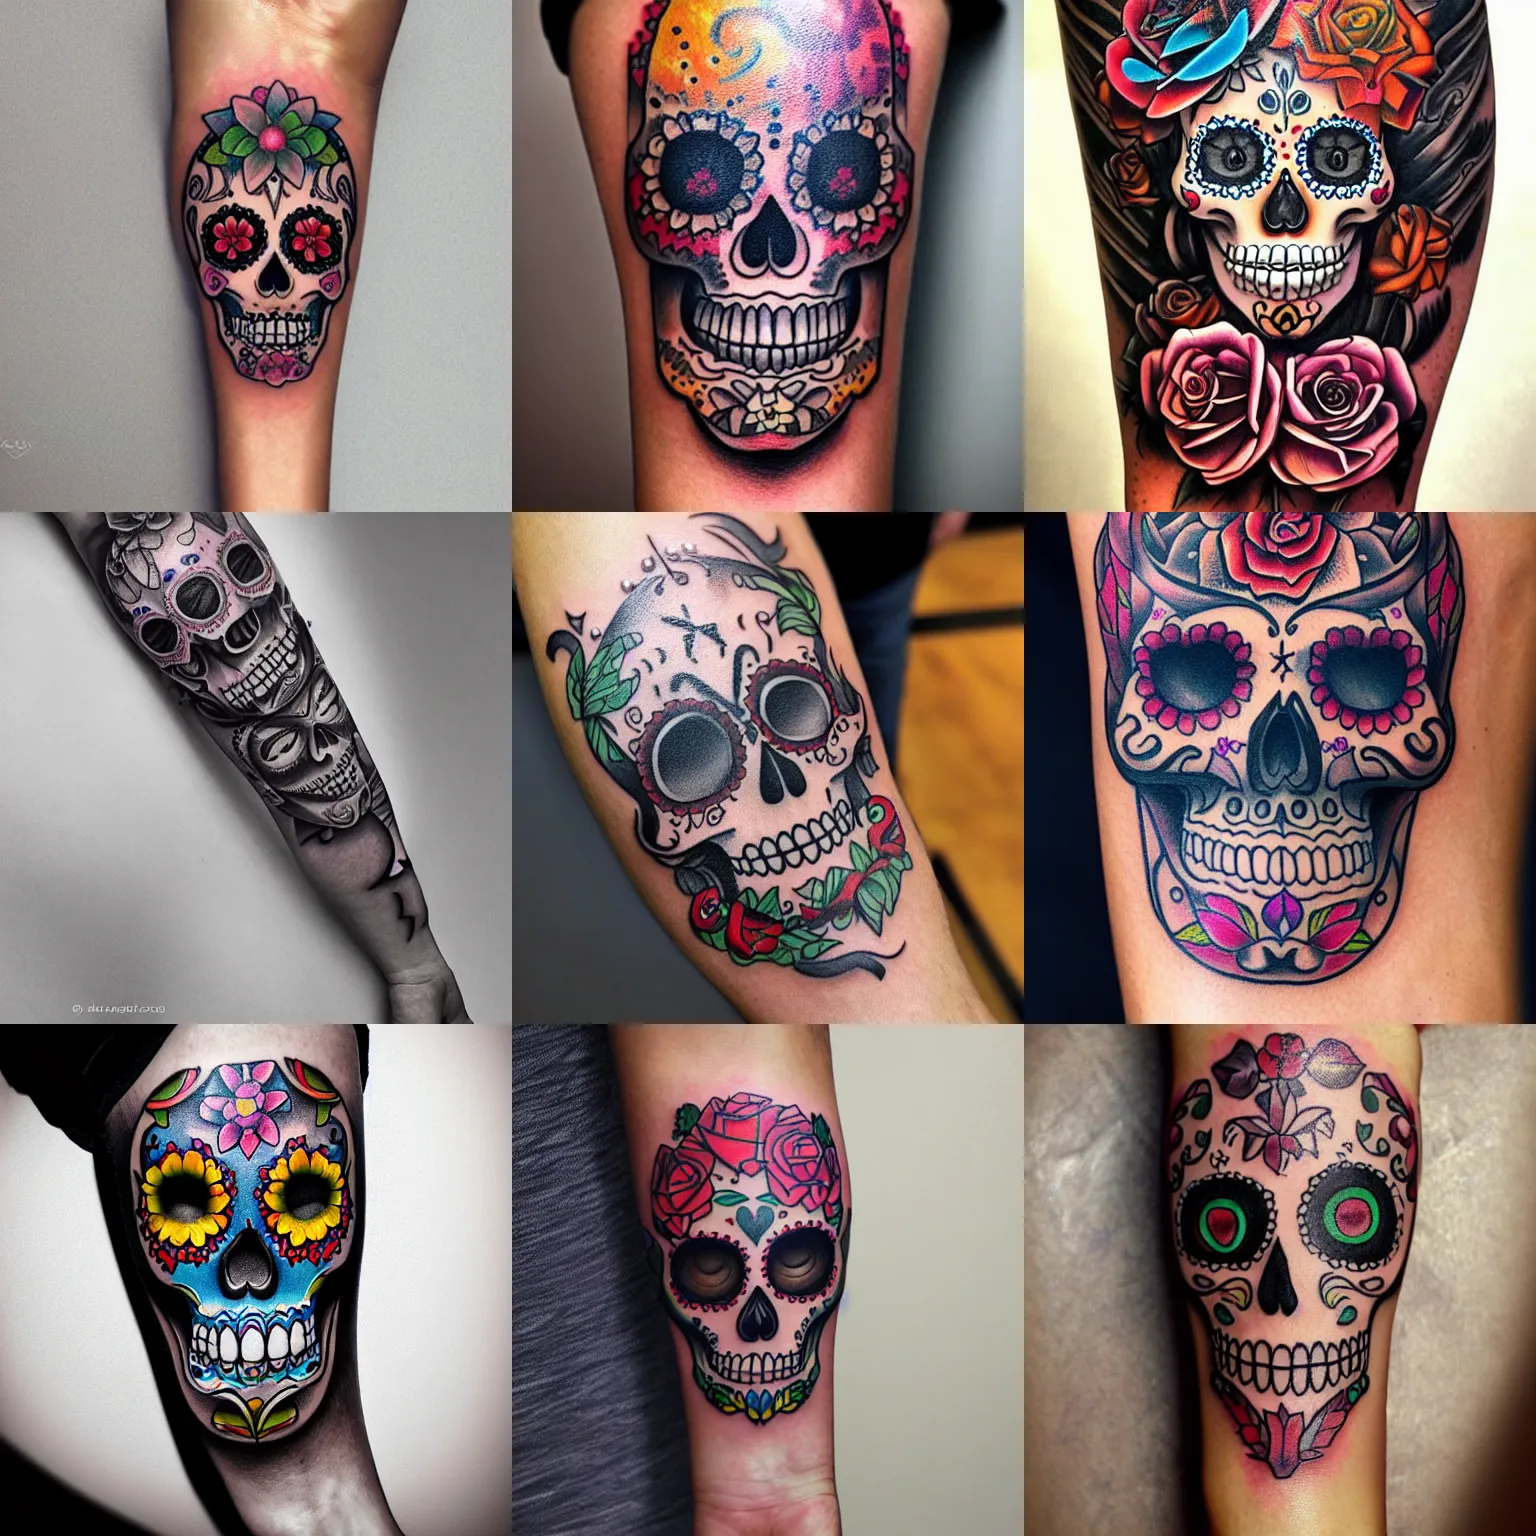 10 Best Black Skulls Tattoo DesignsCollected By Daily Hind News  Daily  Hind News